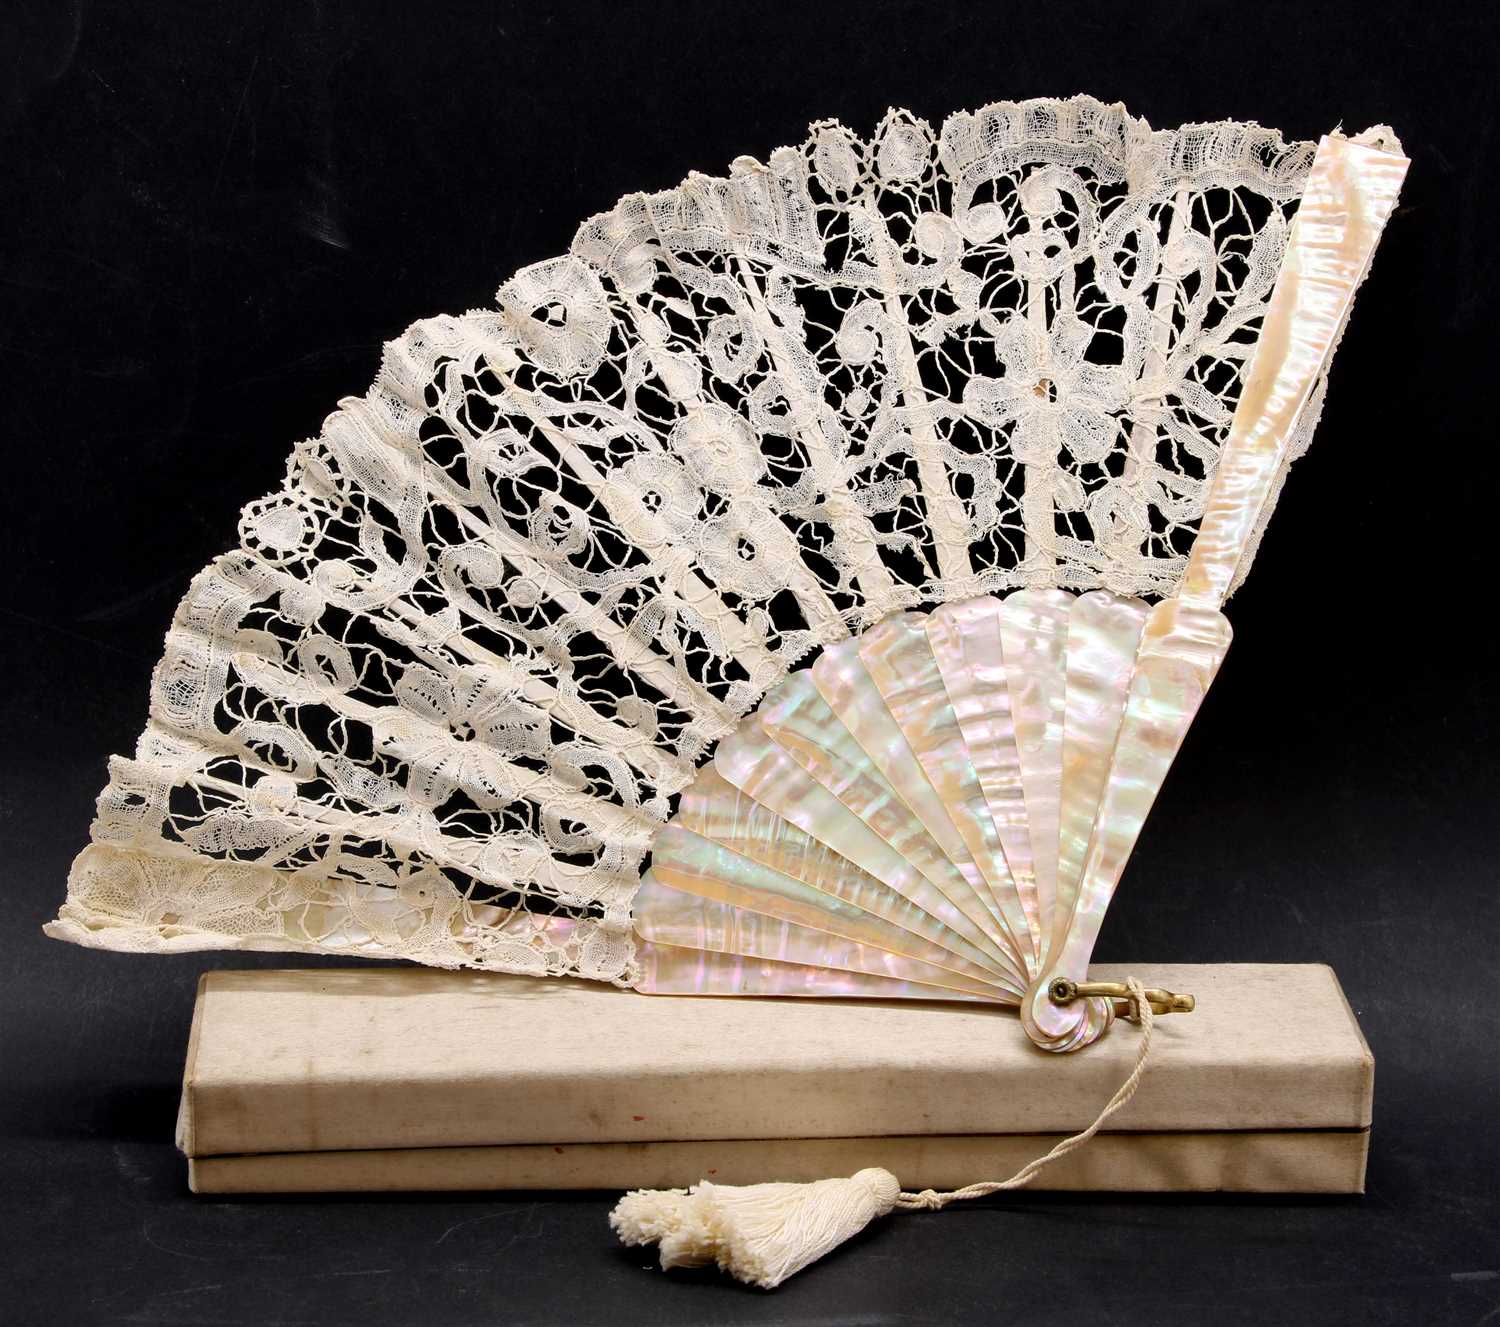 Lot 380 - A late 19th century to early 20th century mother of pearl fan